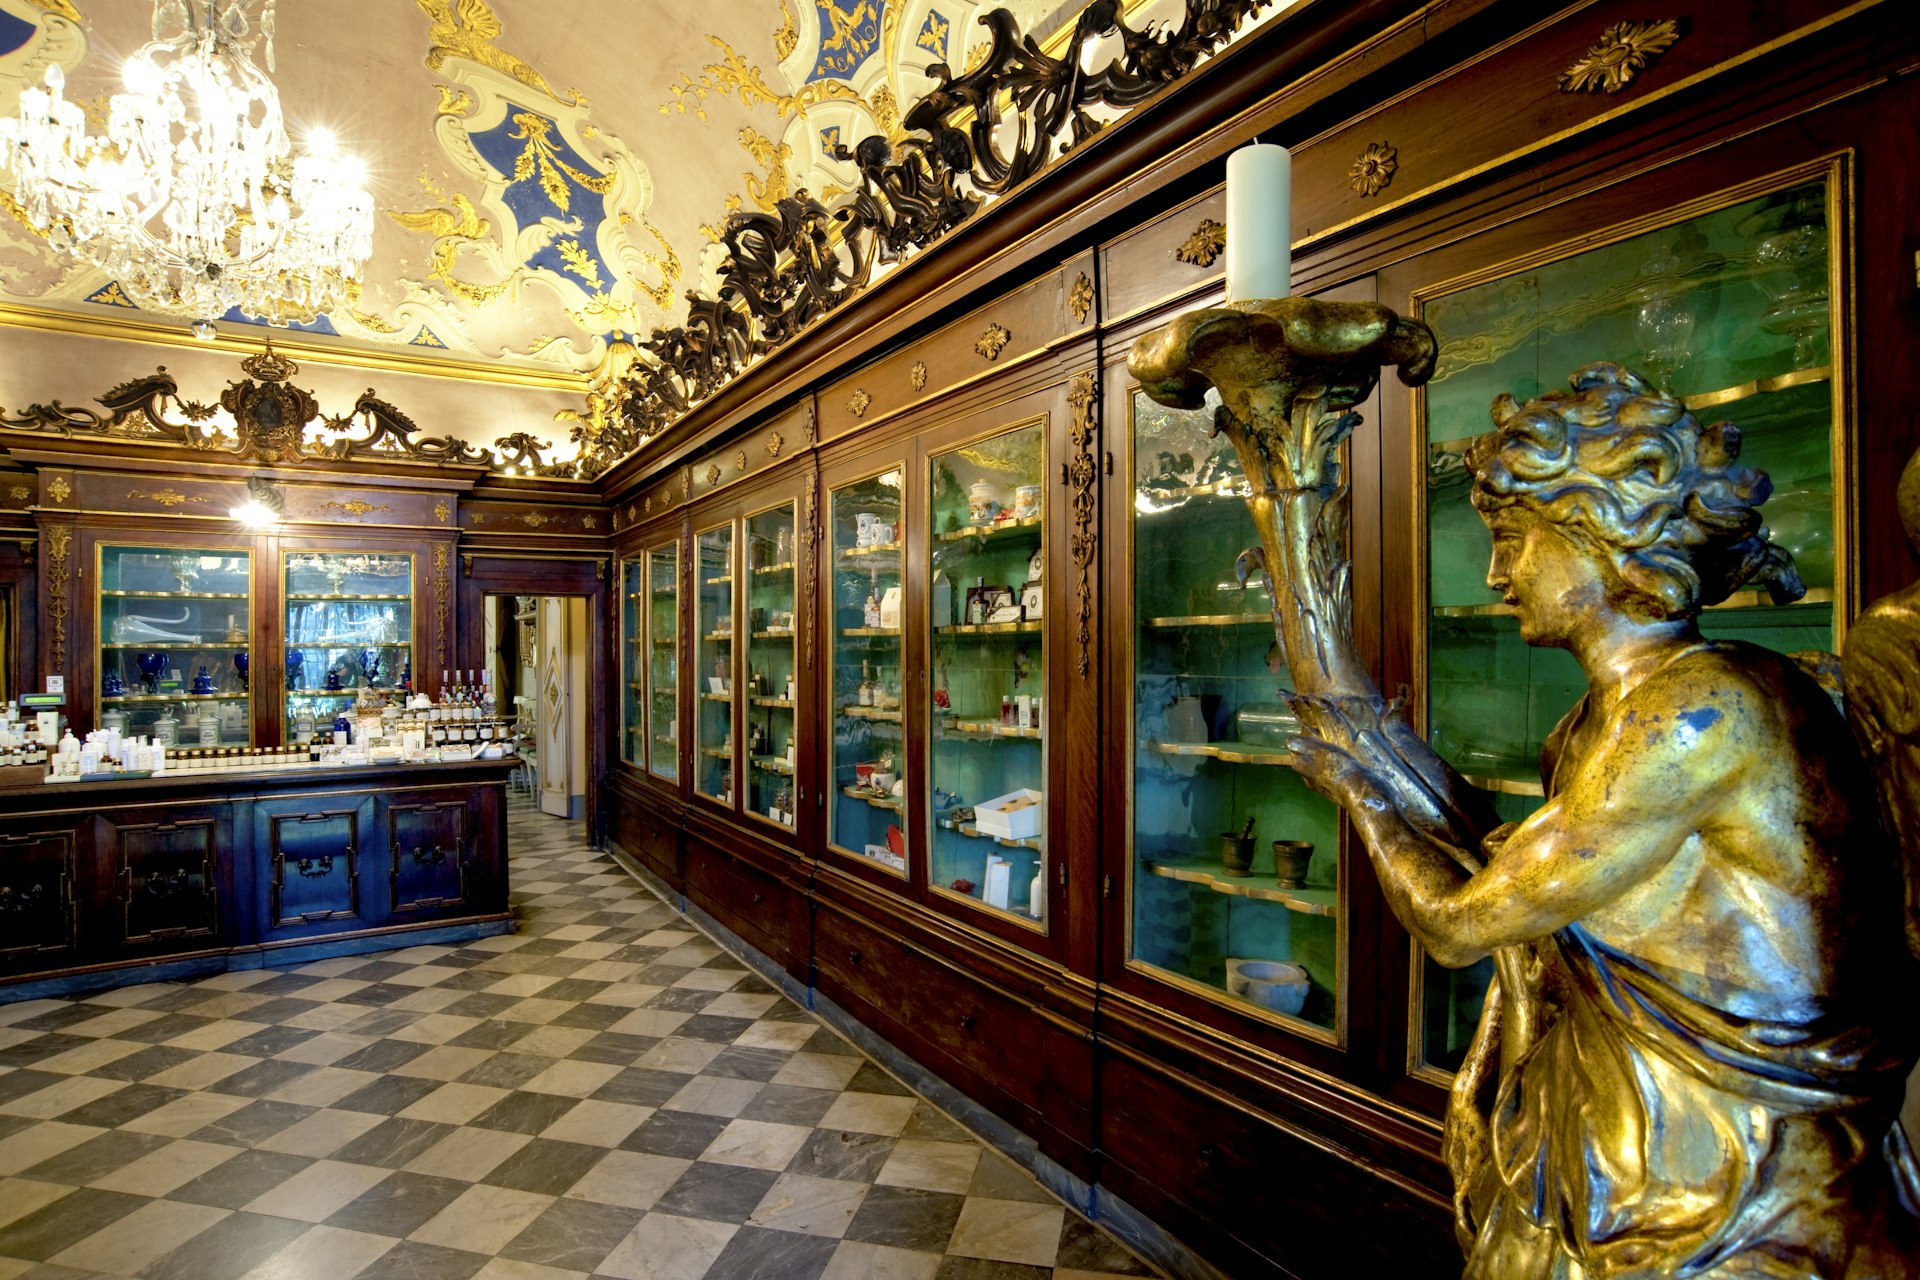 A large room lined with floor-to-ceiling wooden cabinets where antique apothecary items are on display